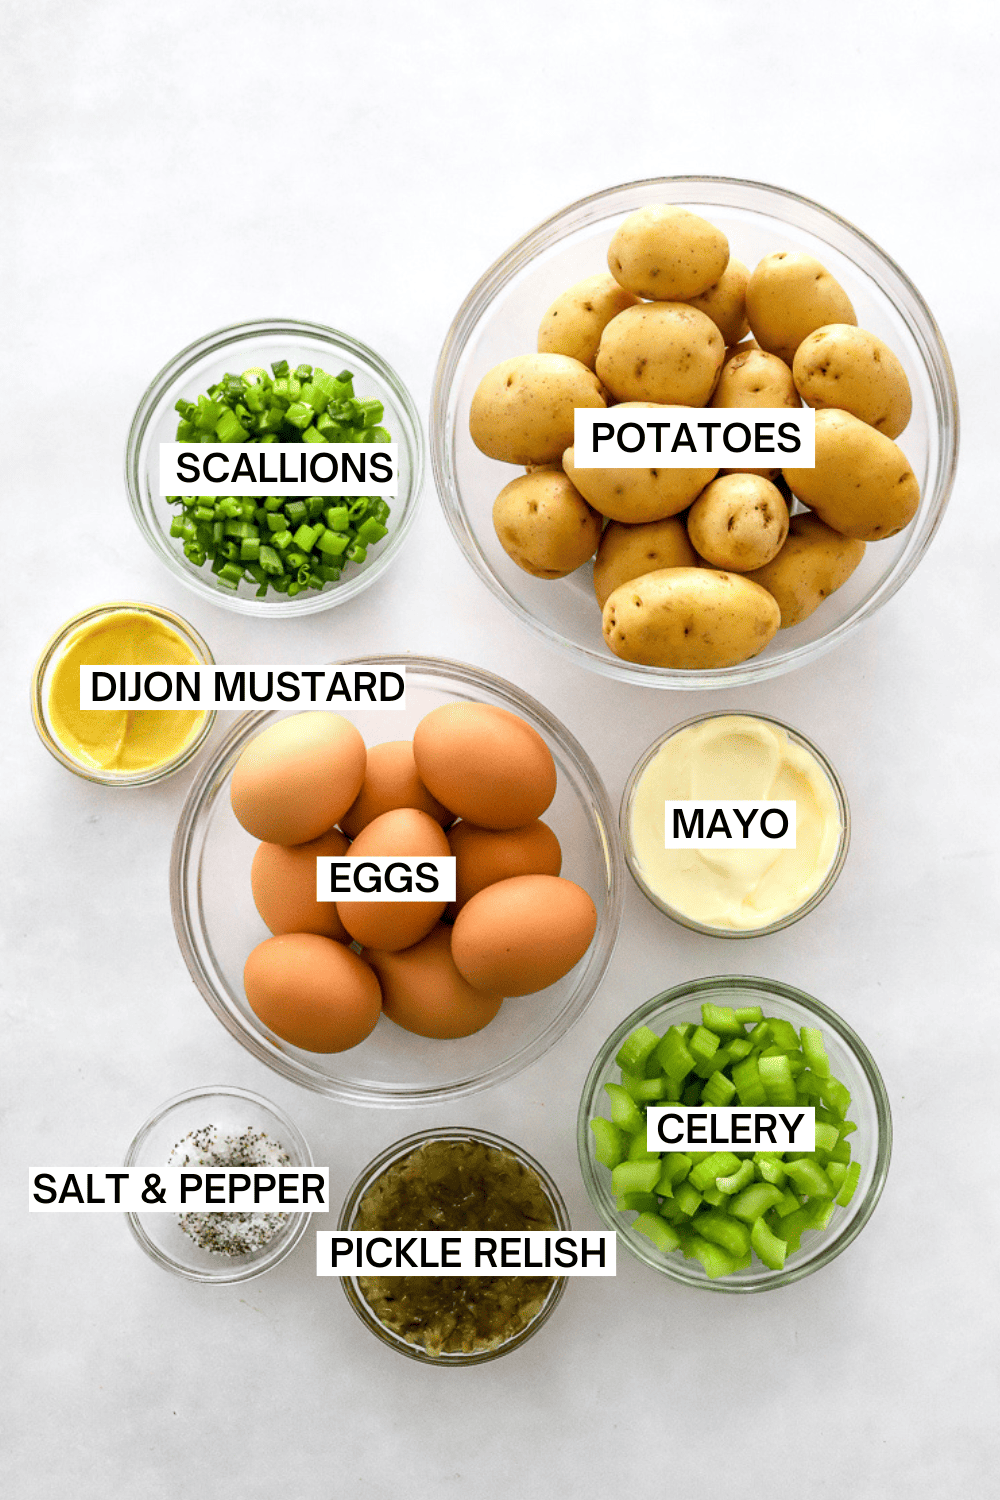 Ingredients for potato salad with labels over each ingredient.